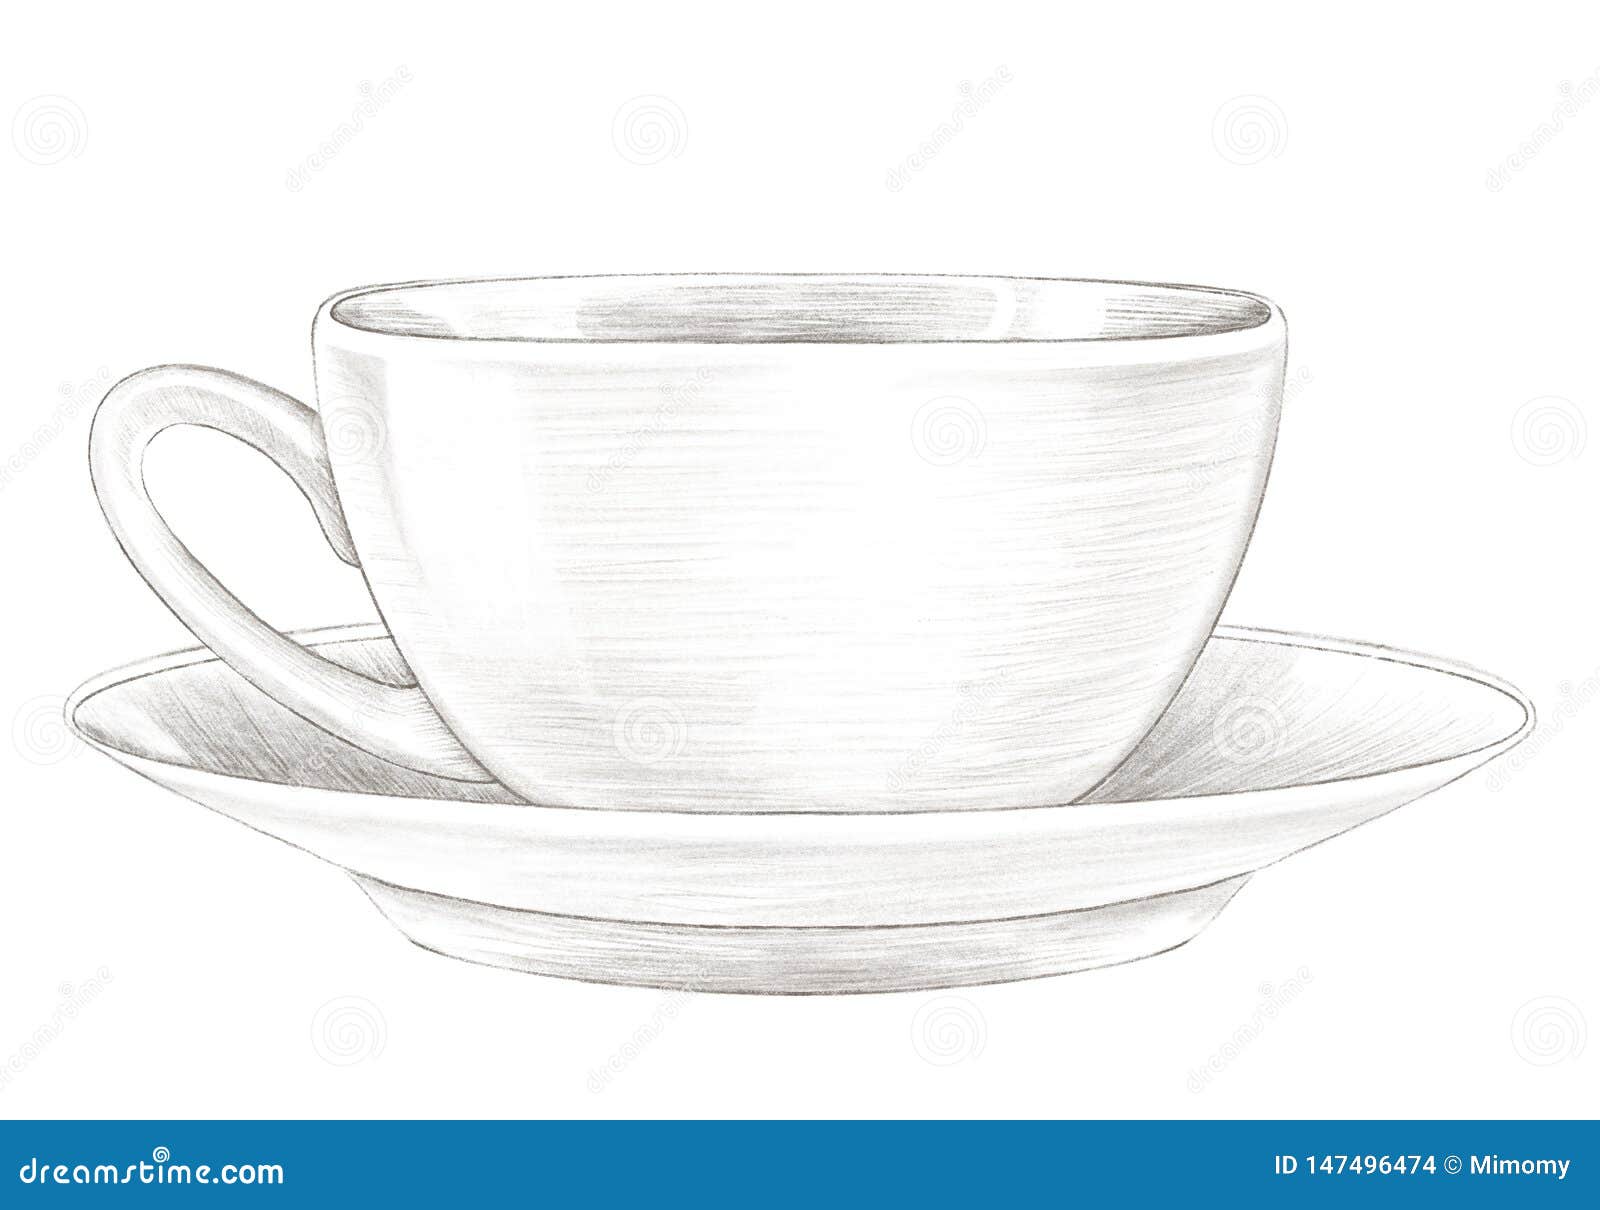 How to Draw a Cup - Step by Step Easy Drawing Guides - Drawing Howtos-saigonsouth.com.vn